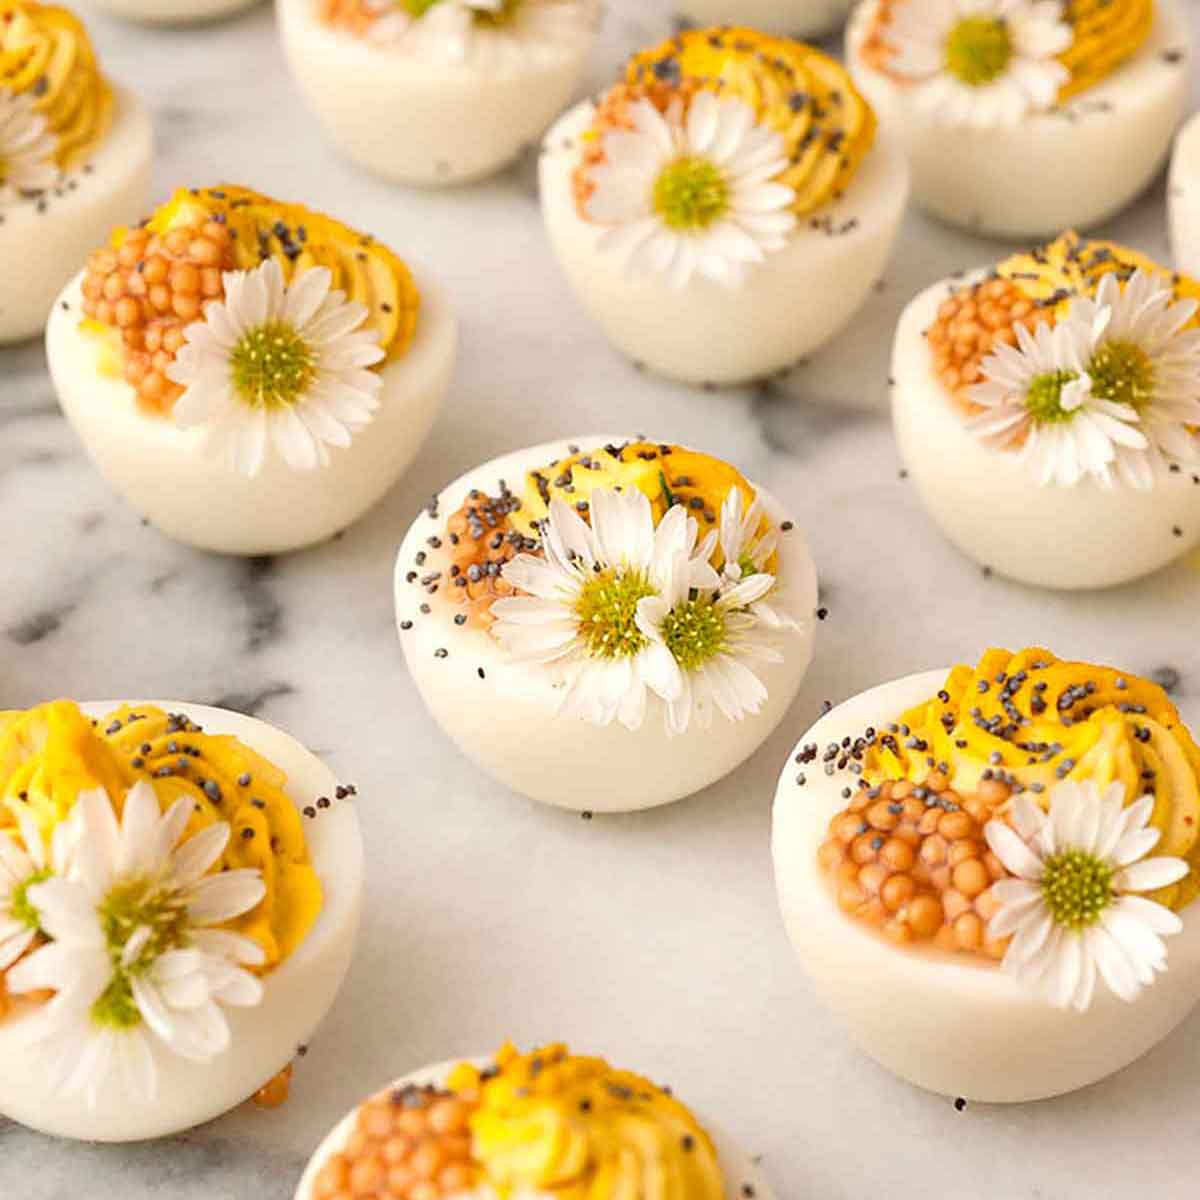 12 deviled eggs on a marble plate garnished with daisies and mustard caviar.